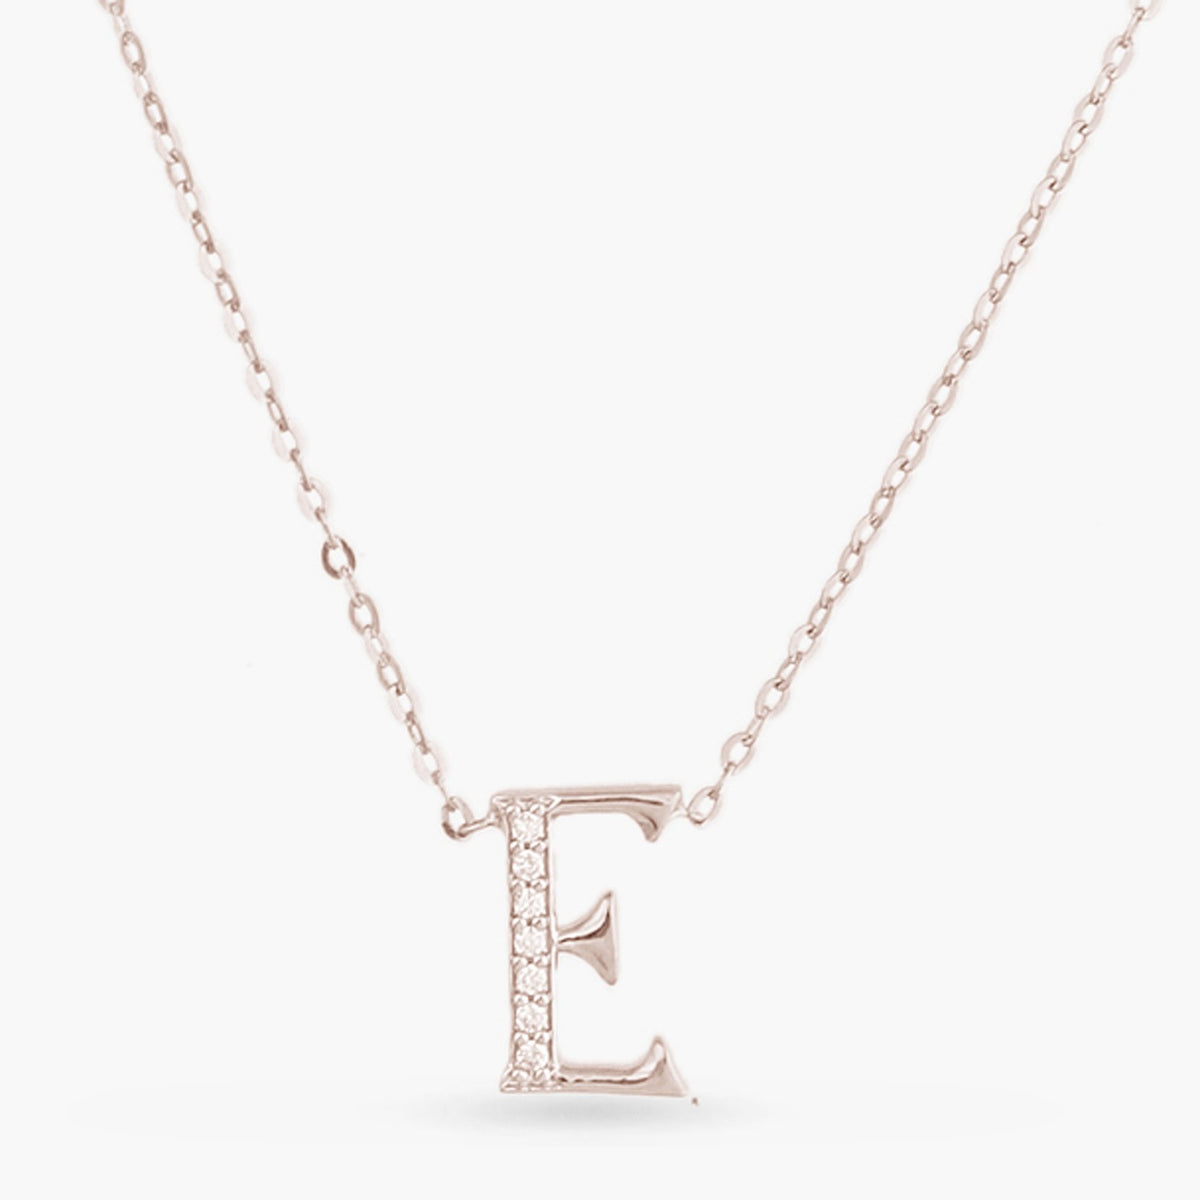 Buy Initial E Necklace Sterling Silver Wax Seal Pendant Necklace Wax Seal  Jewelry Letter Initial Pendant Online in India - Etsy